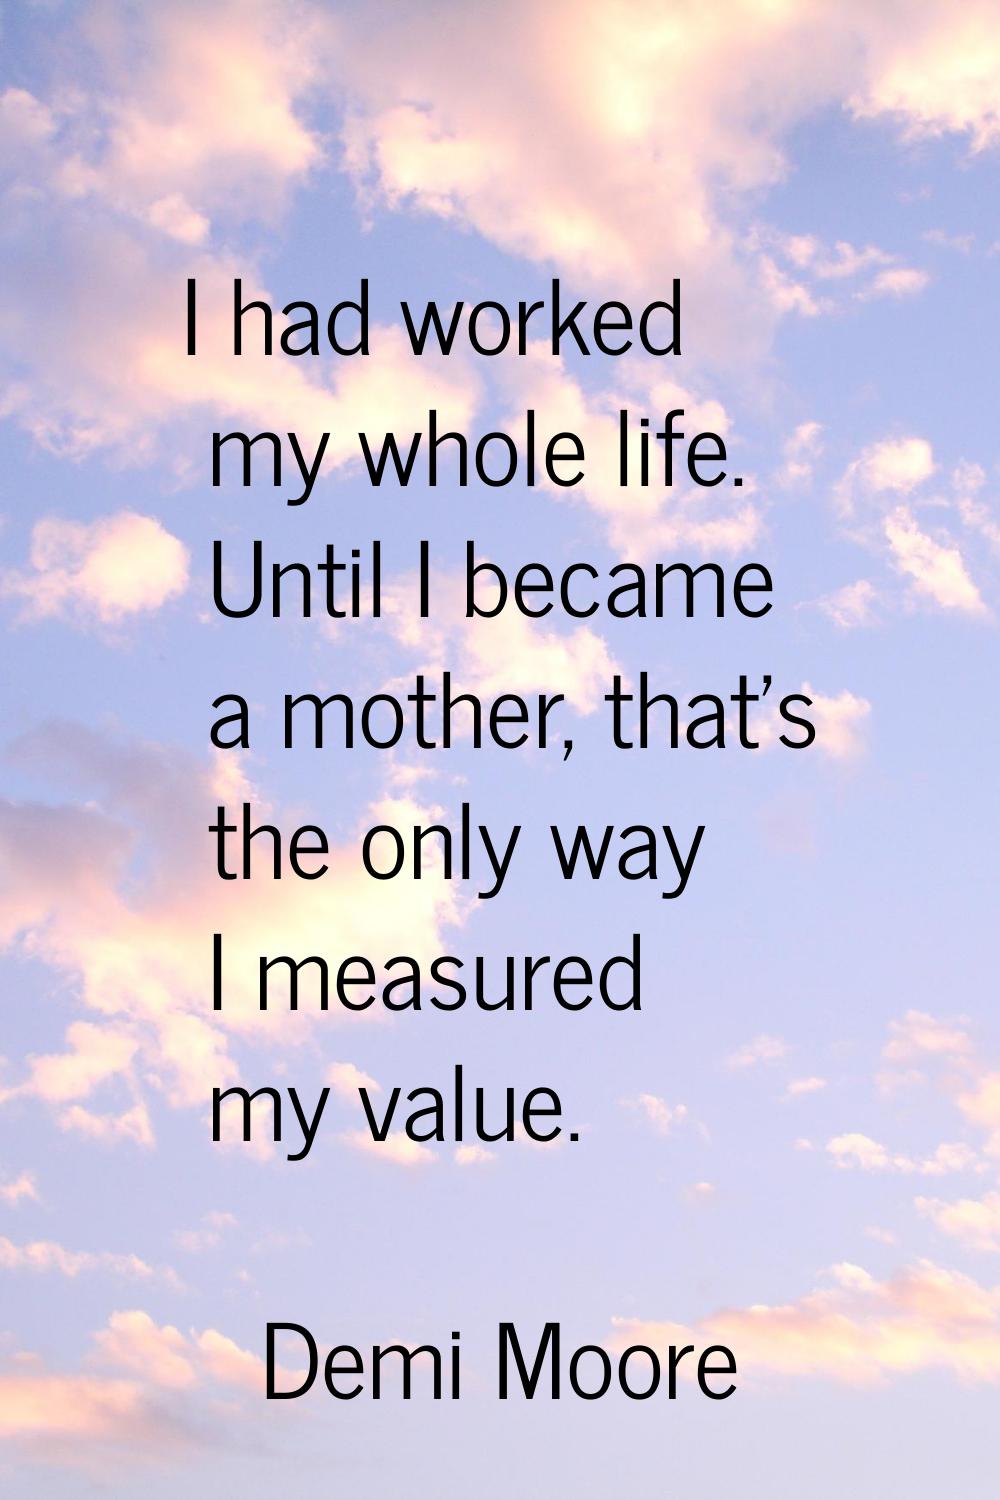 I had worked my whole life. Until I became a mother, that's the only way I measured my value.